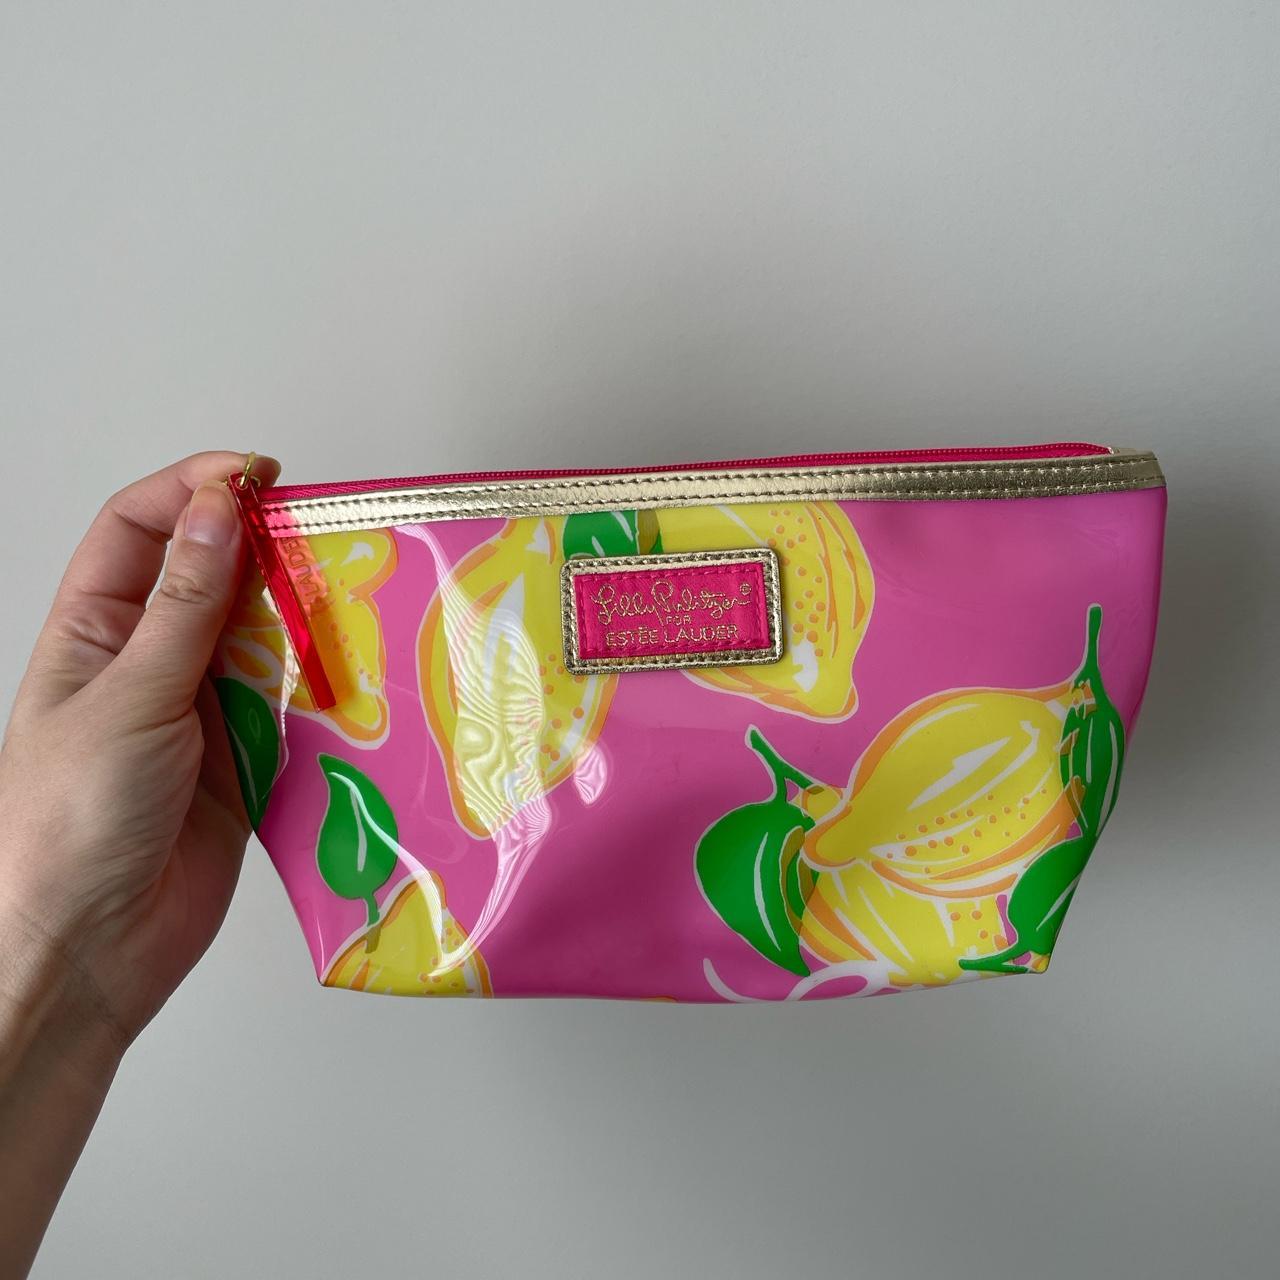 Lilly Pulitzer Women's Pink and Yellow Bag